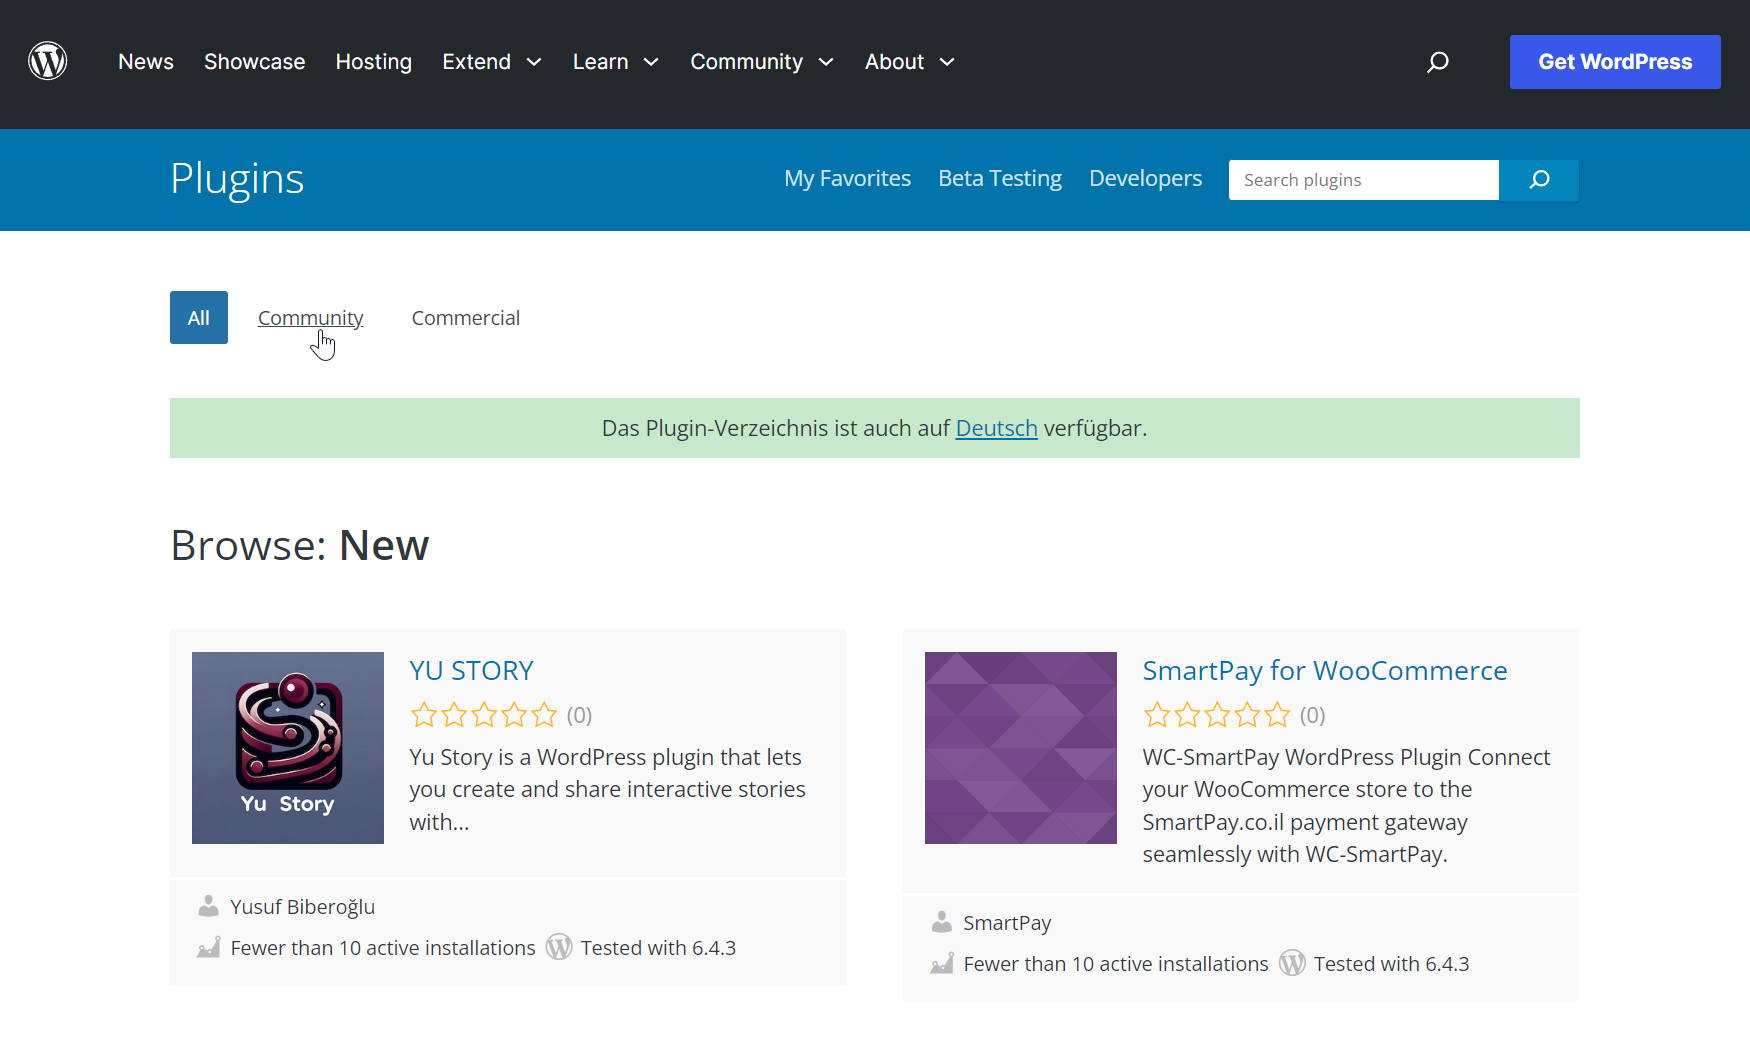 Screenshot of the WordPress plugin directory page featuring two plugins, "YU STORY" and "SmartPay for WooCommerce", with plugin descriptions, ratings, and installation counts.